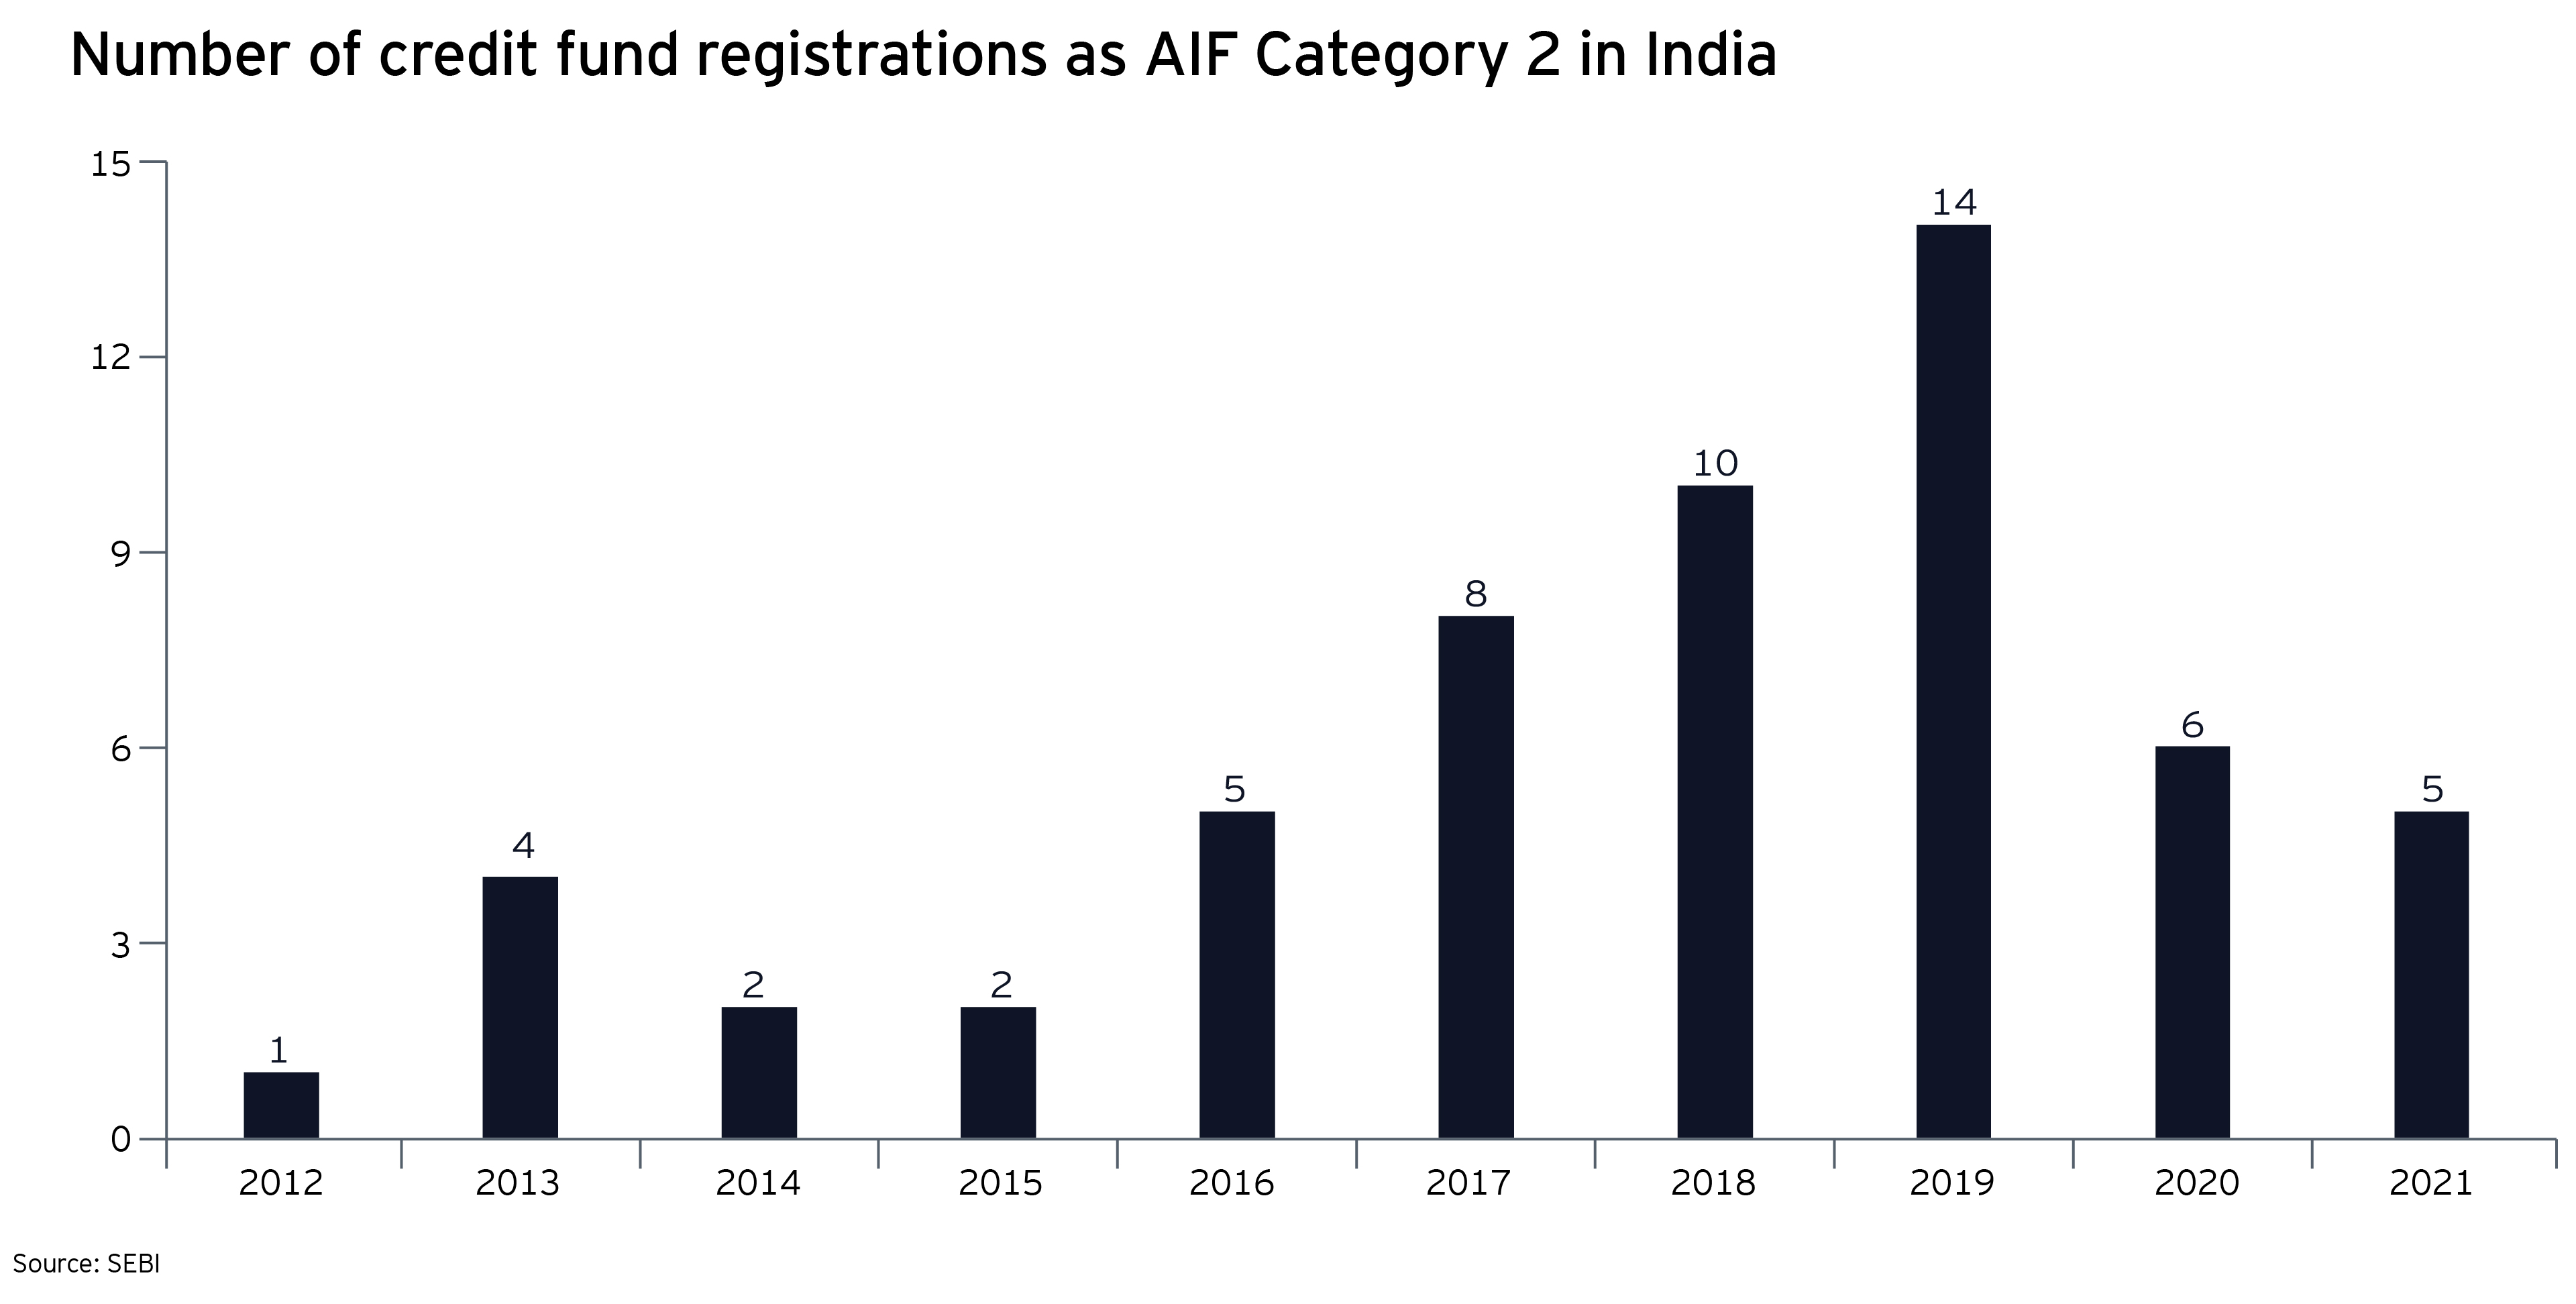 Number of credit funds registrations as AIF category 2 in India 